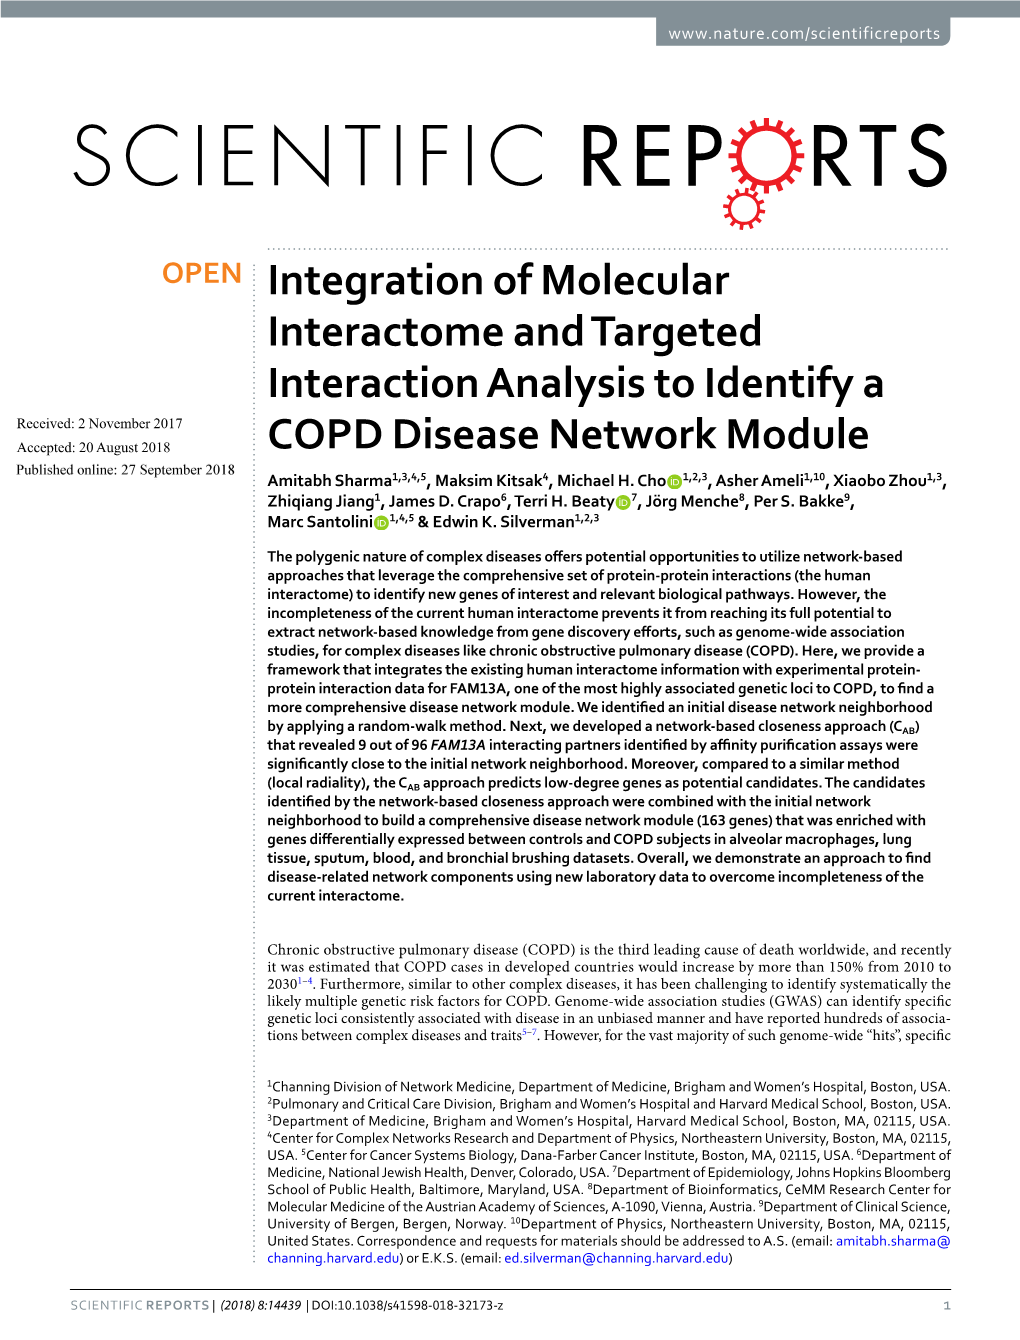 Integration of Molecular Interactome and Targeted Interaction Analysis To